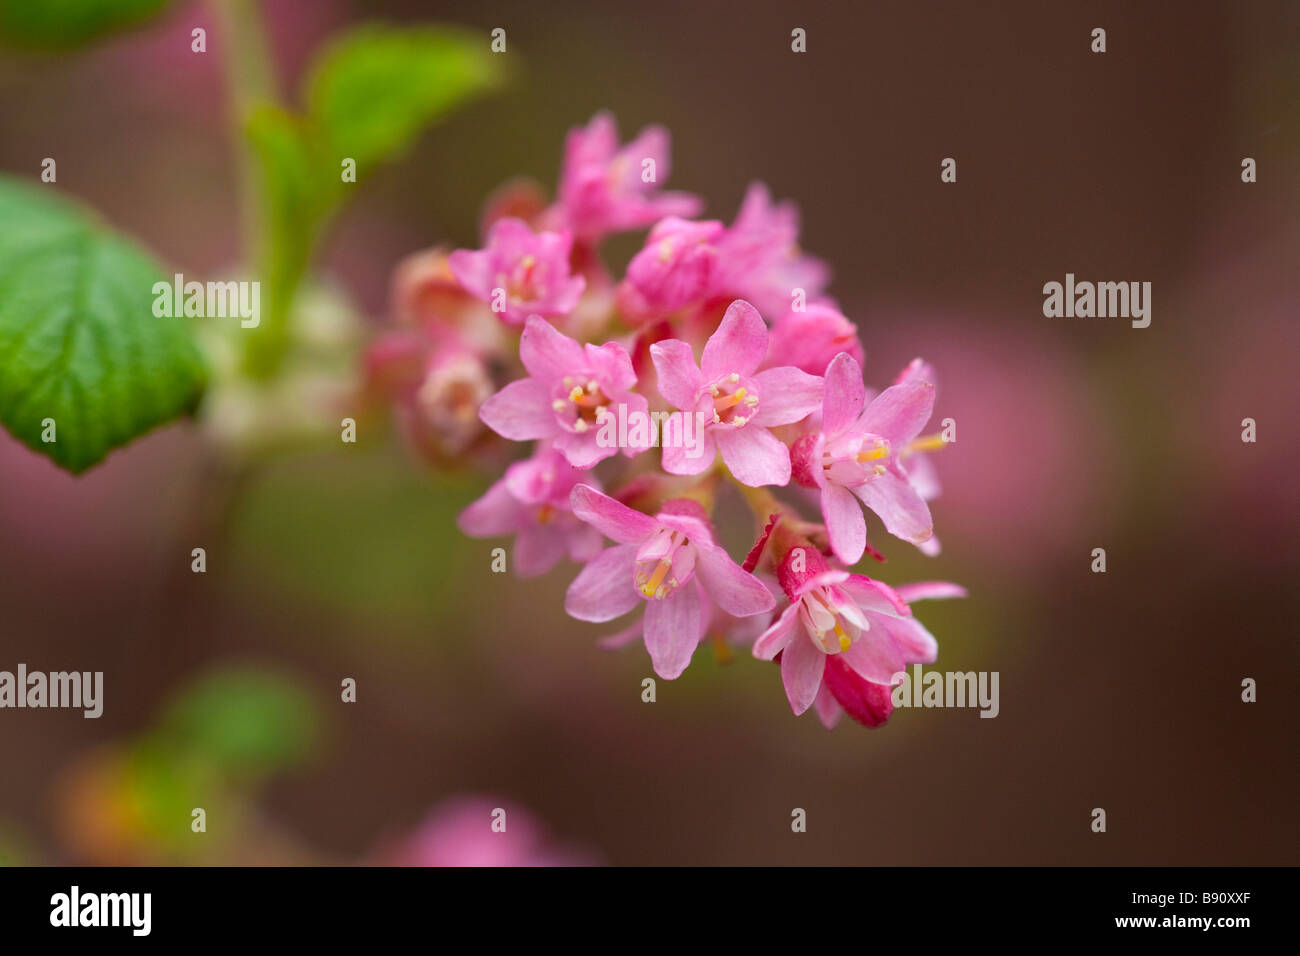 flowering currant blossom Stock Photo